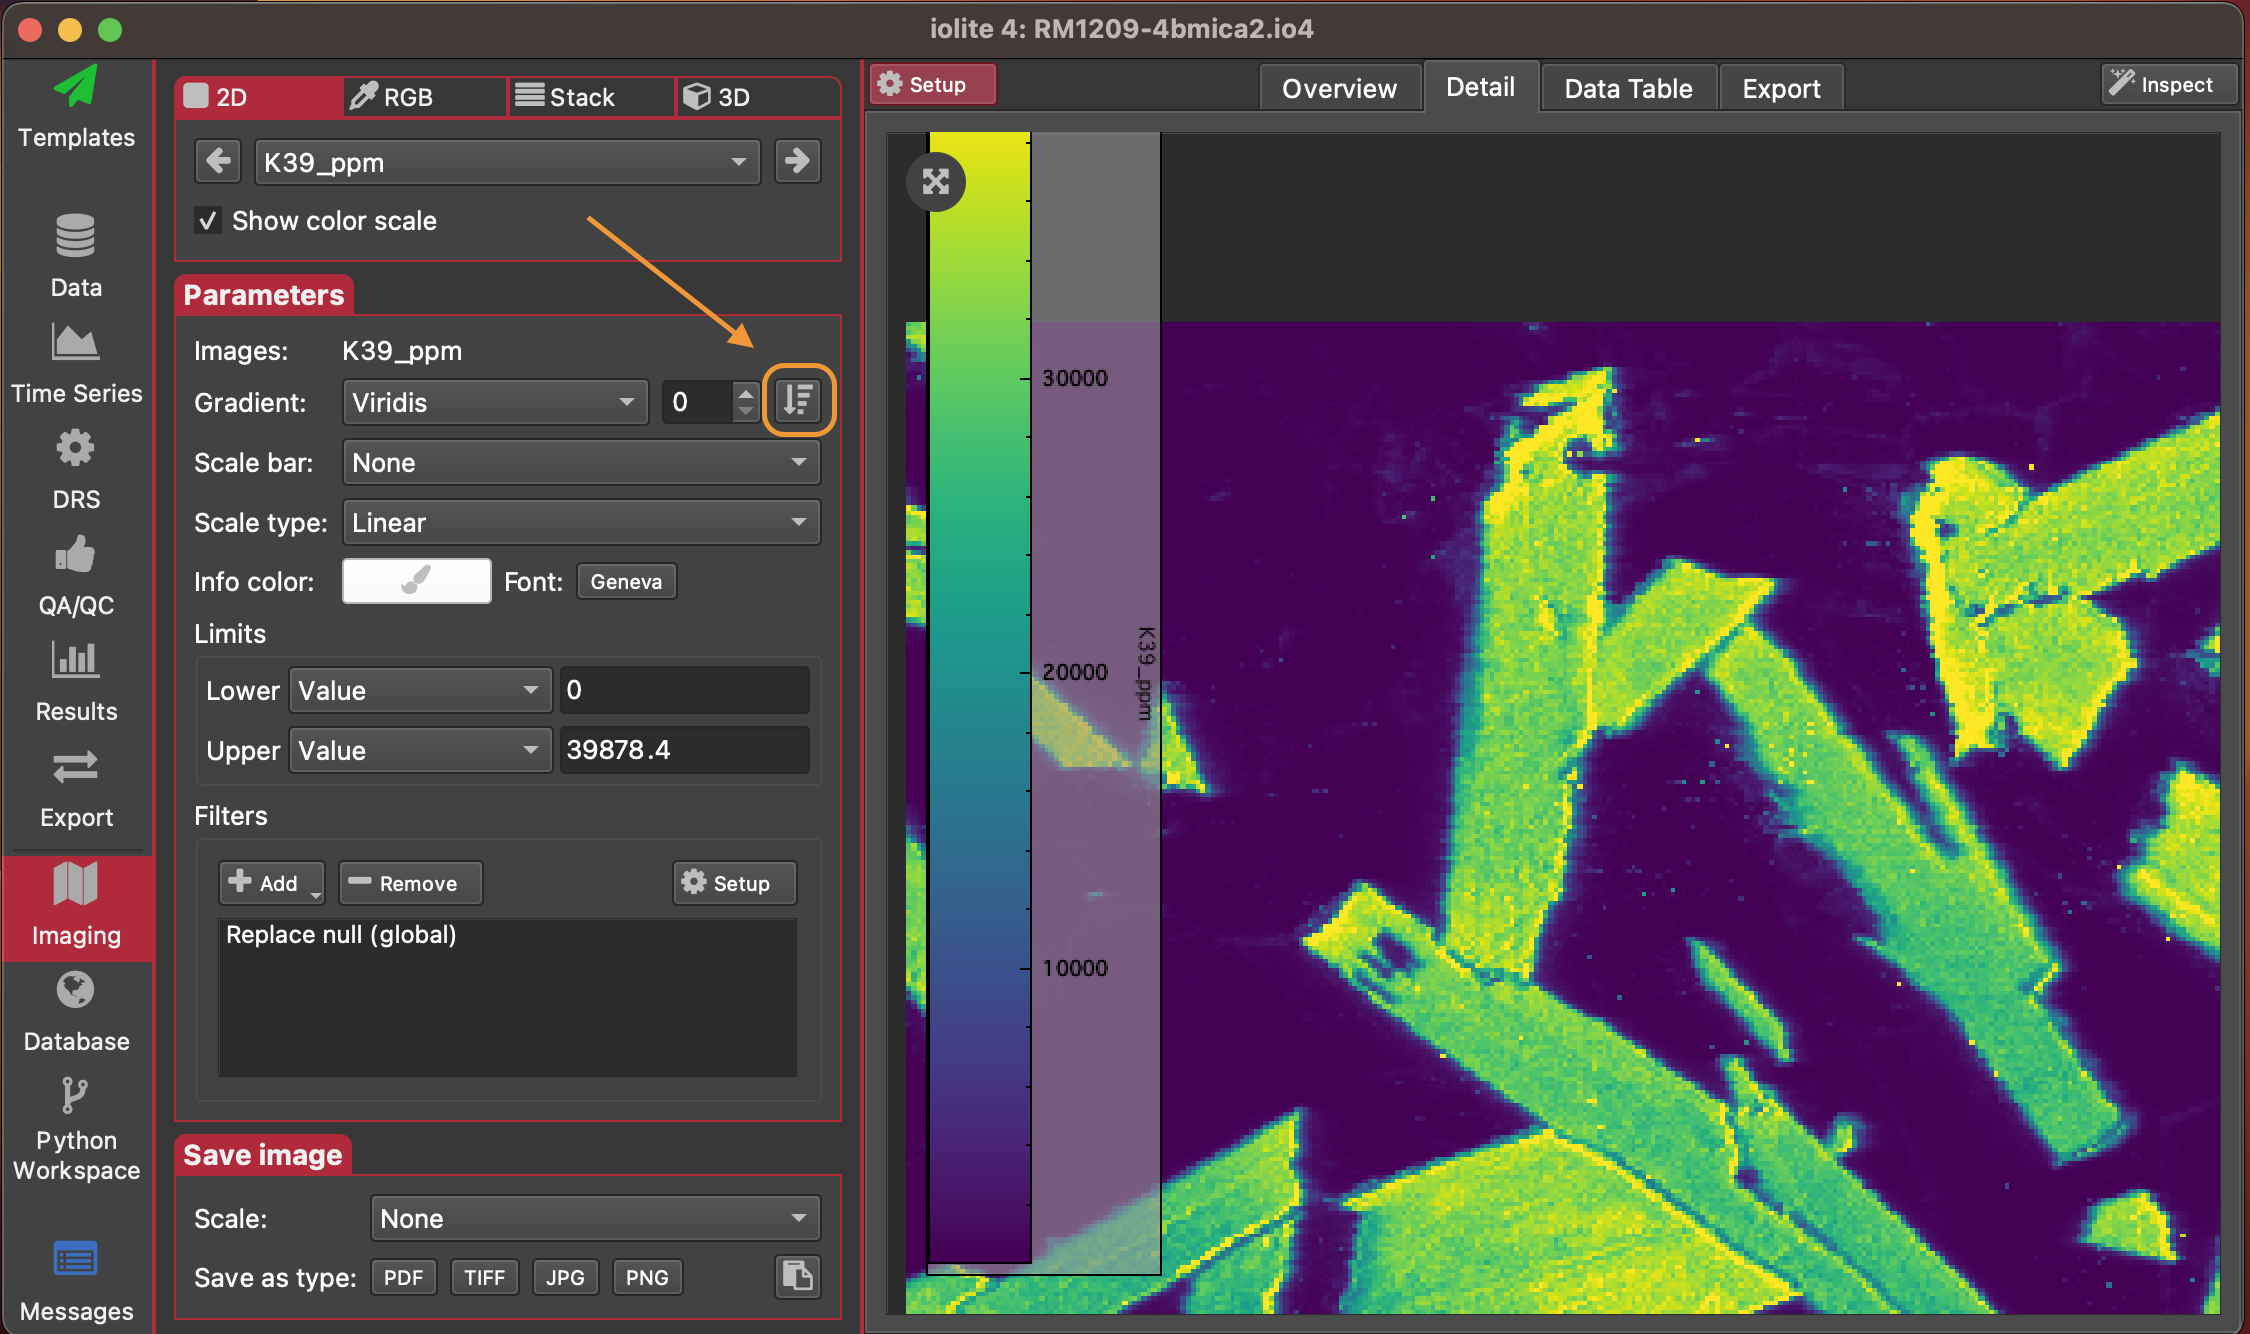 A screenshot of the Imaging Tab in iolite showing the location of the Invert colorscale button